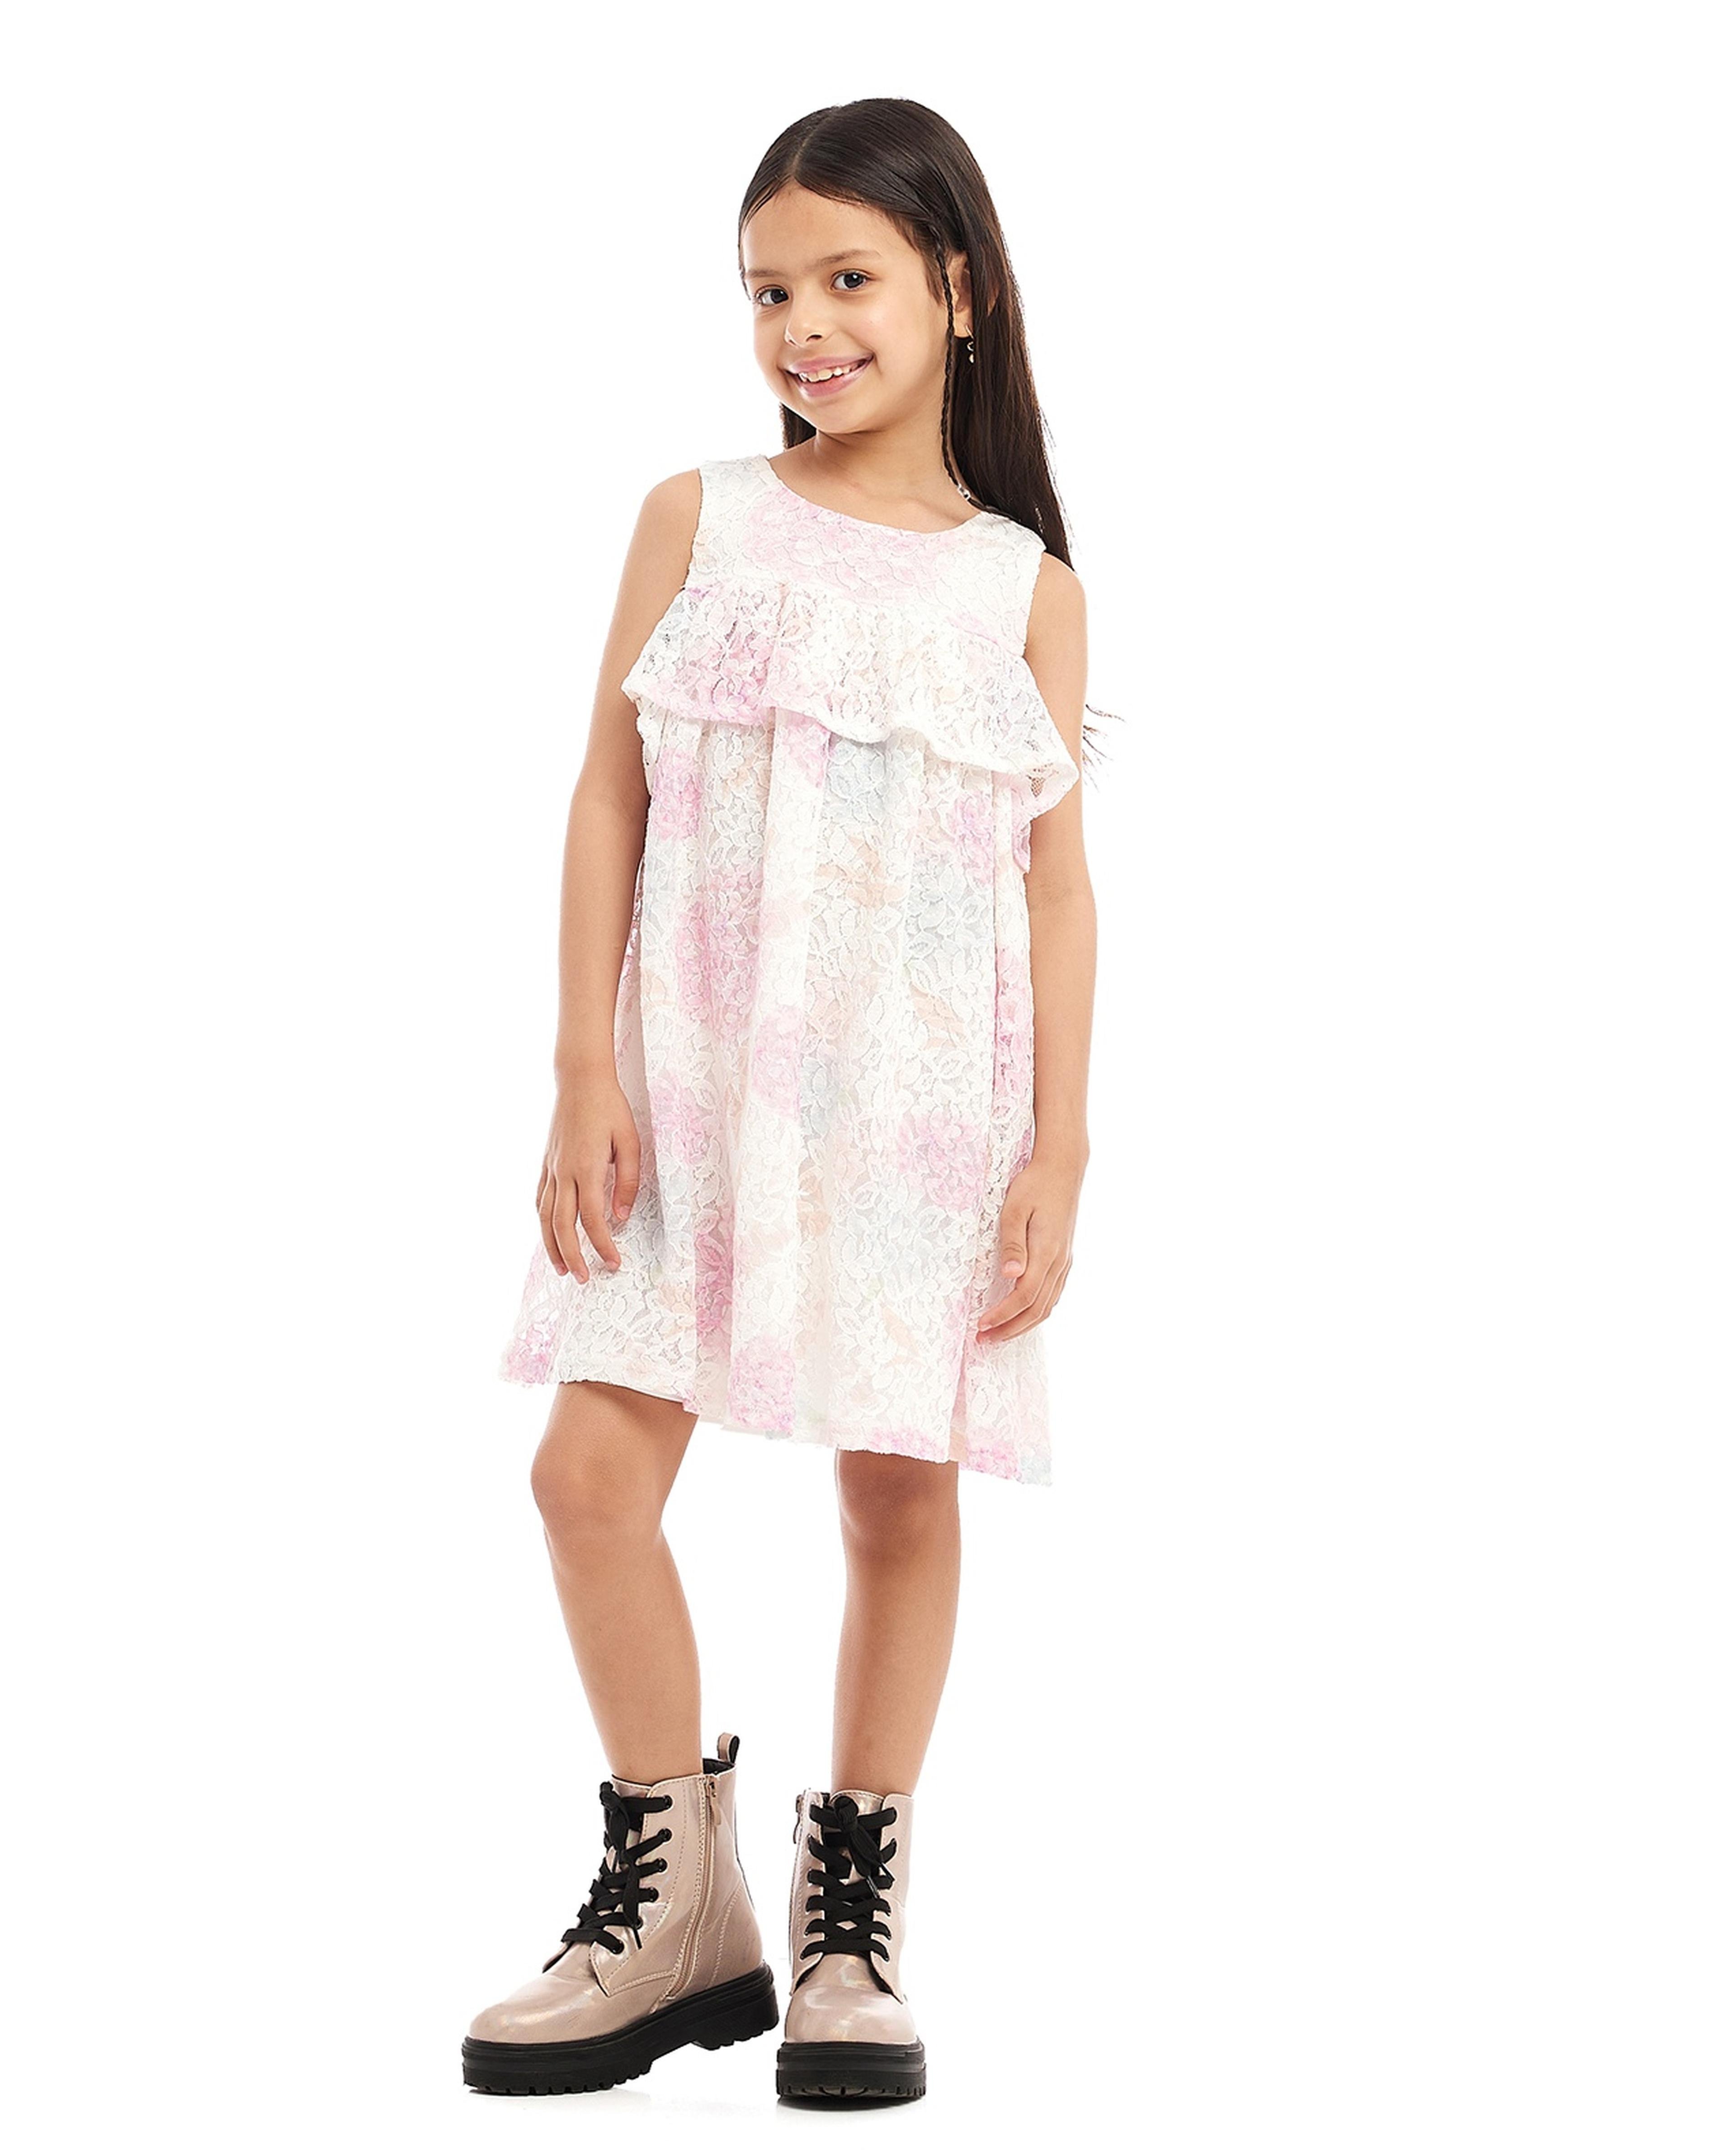 Laced A-Line Sleeveless Dress with Round Neck